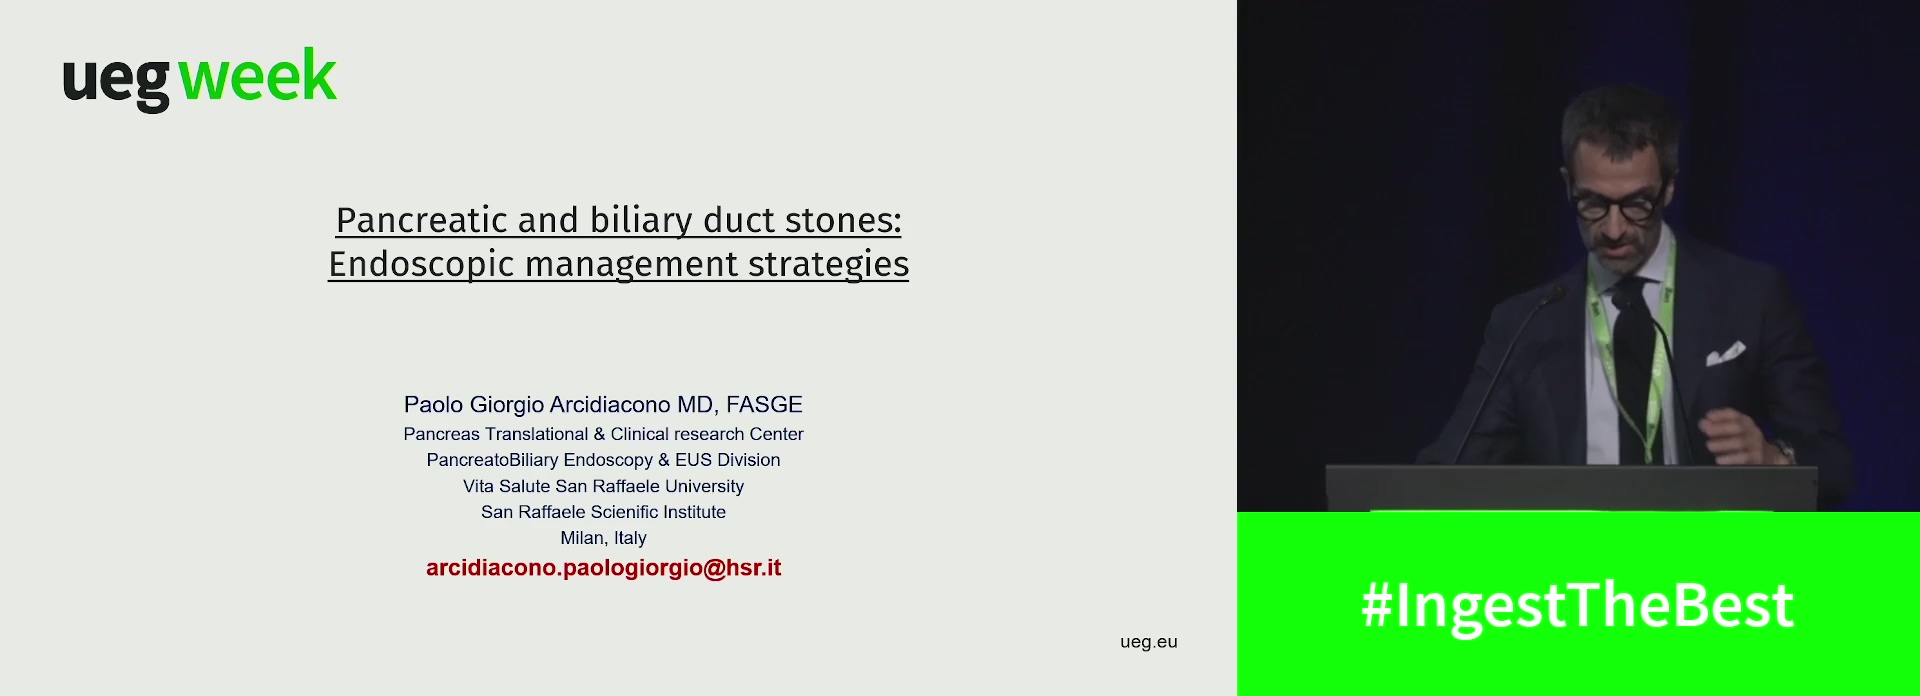 Pancreatic and biliary duct stones: Endoscopic management strategies